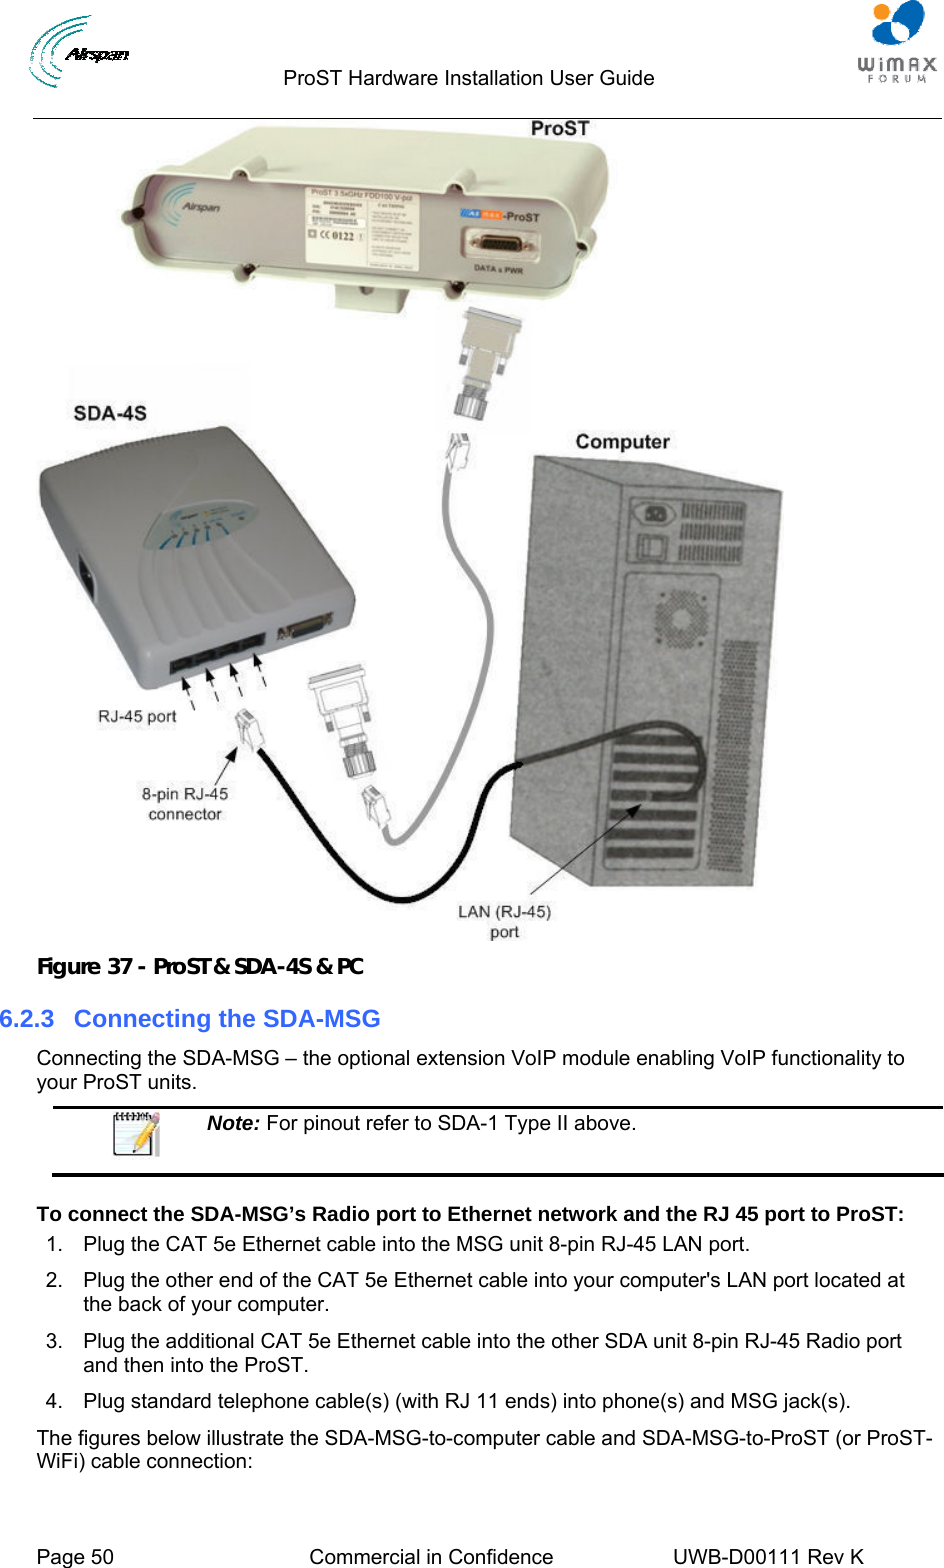                                  ProST Hardware Installation User Guide     Page 50  Commercial in Confidence  UWB-D00111 Rev K    Figure 37 - ProST &amp; SDA-4S &amp; PC 6.2.3  Connecting the SDA-MSG Connecting the SDA-MSG – the optional extension VoIP module enabling VoIP functionality to your ProST units.  Note: For pinout refer to SDA-1 Type II above.  To connect the SDA-MSG’s Radio port to Ethernet network and the RJ 45 port to ProST: 1.  Plug the CAT 5e Ethernet cable into the MSG unit 8-pin RJ-45 LAN port.  2.  Plug the other end of the CAT 5e Ethernet cable into your computer&apos;s LAN port located at the back of your computer. 3.  Plug the additional CAT 5e Ethernet cable into the other SDA unit 8-pin RJ-45 Radio port and then into the ProST. 4.  Plug standard telephone cable(s) (with RJ 11 ends) into phone(s) and MSG jack(s). The figures below illustrate the SDA-MSG-to-computer cable and SDA-MSG-to-ProST (or ProST-WiFi) cable connection: 